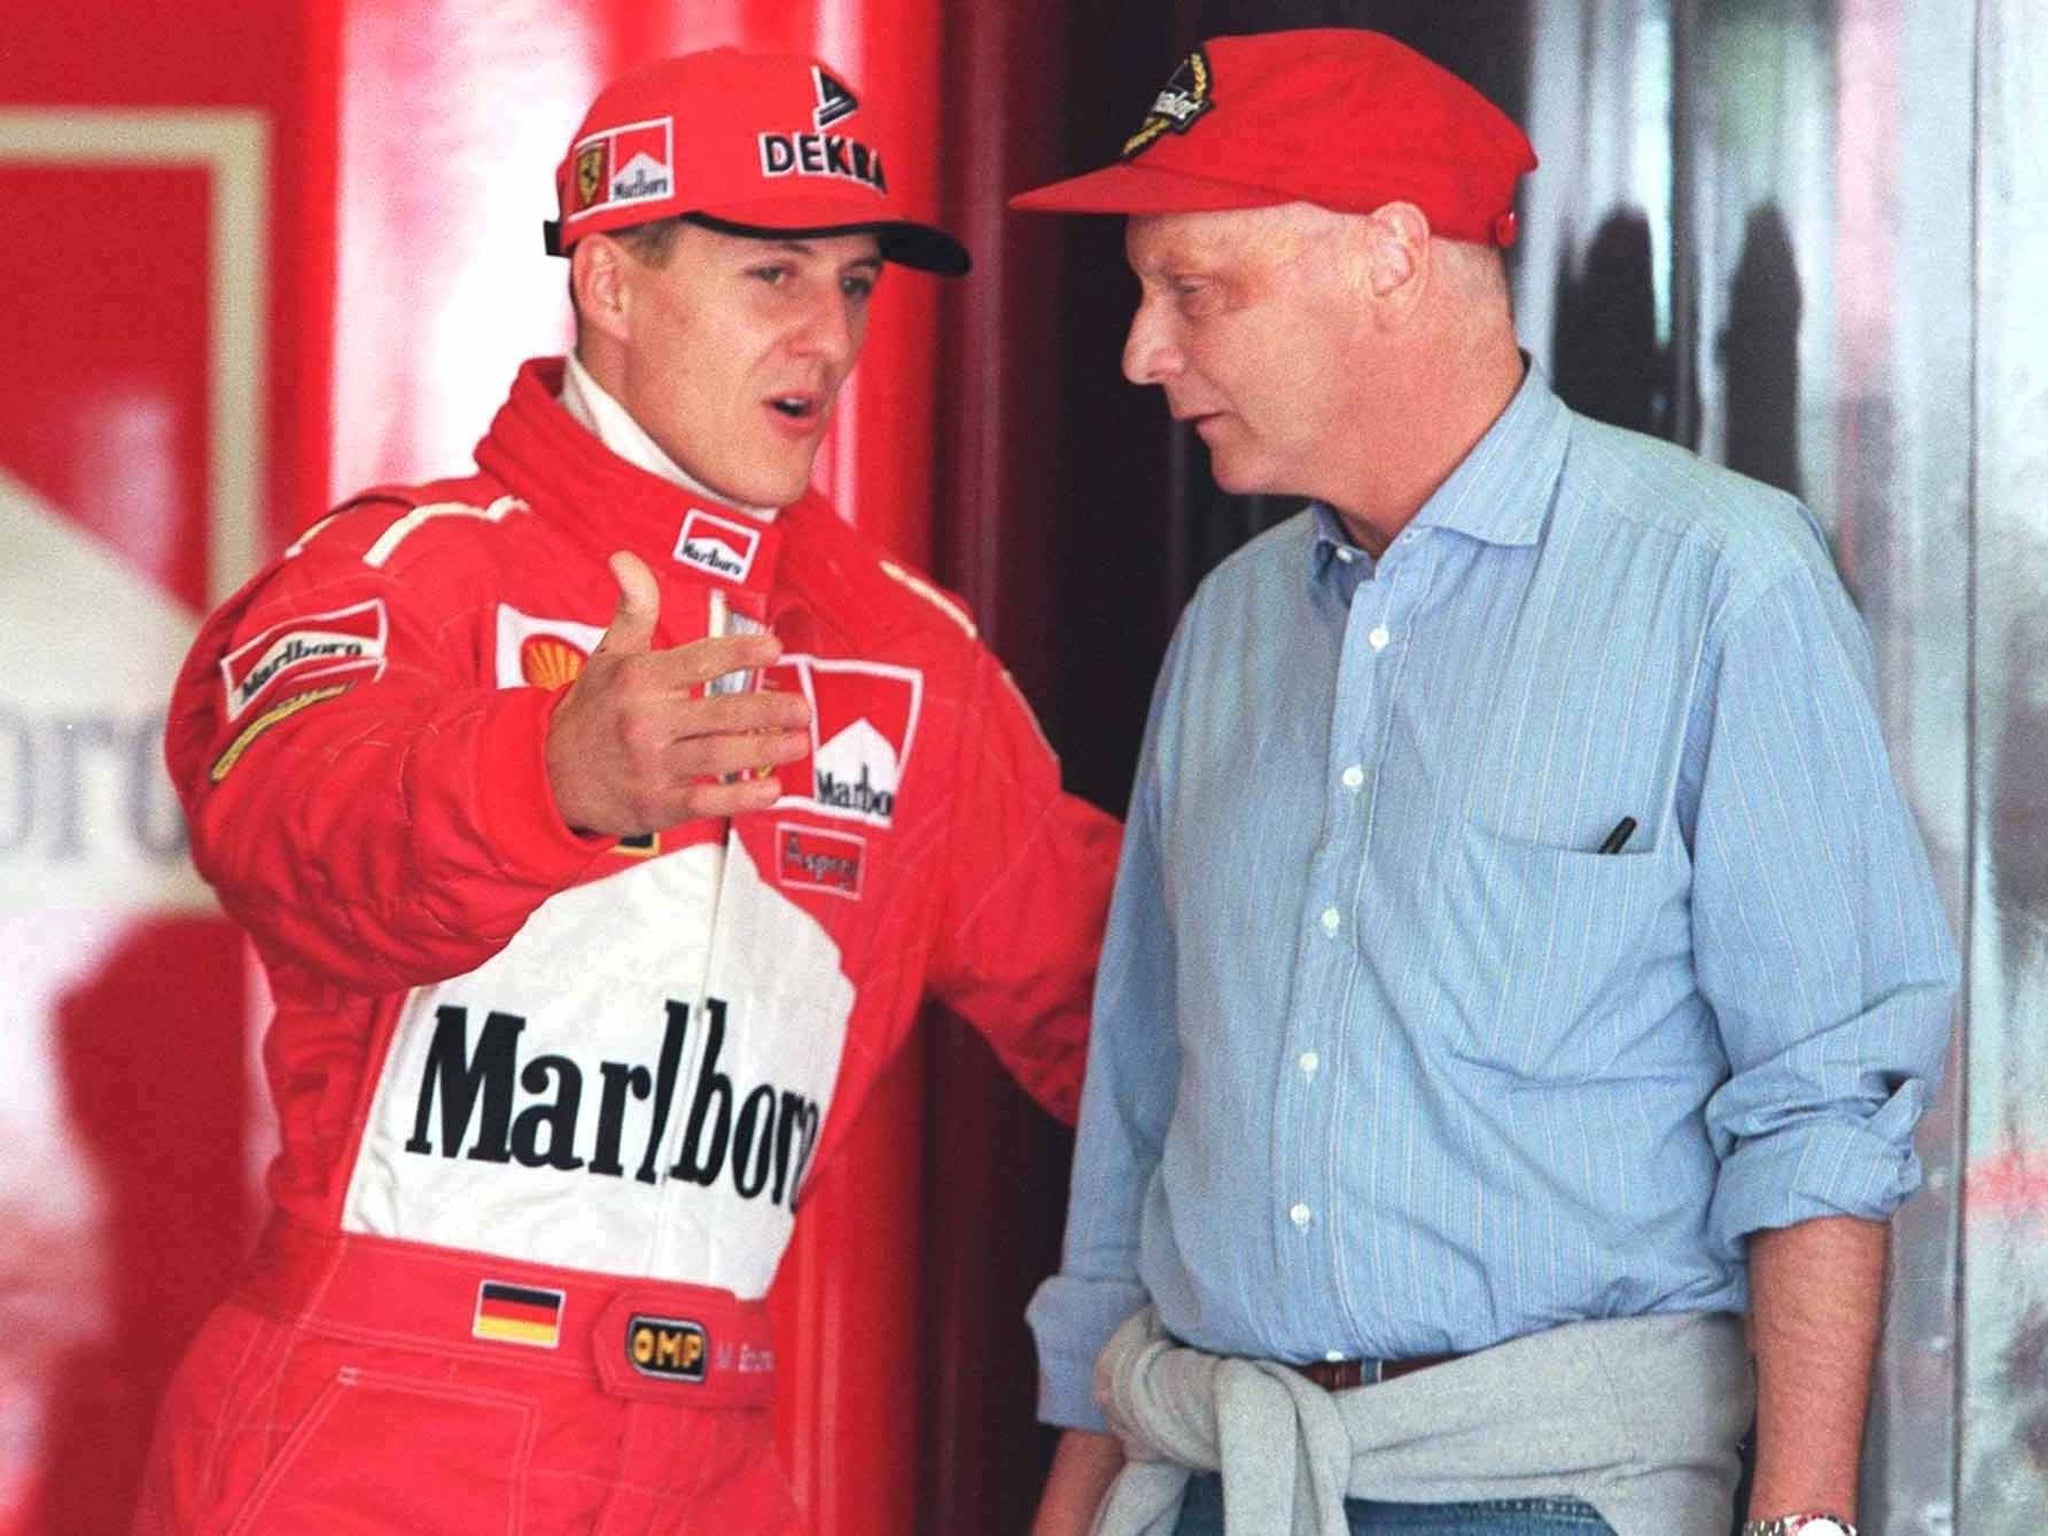 Michael Schumacher and Niki Lauda talk during the Spanish Grand Prix weekend in 1998